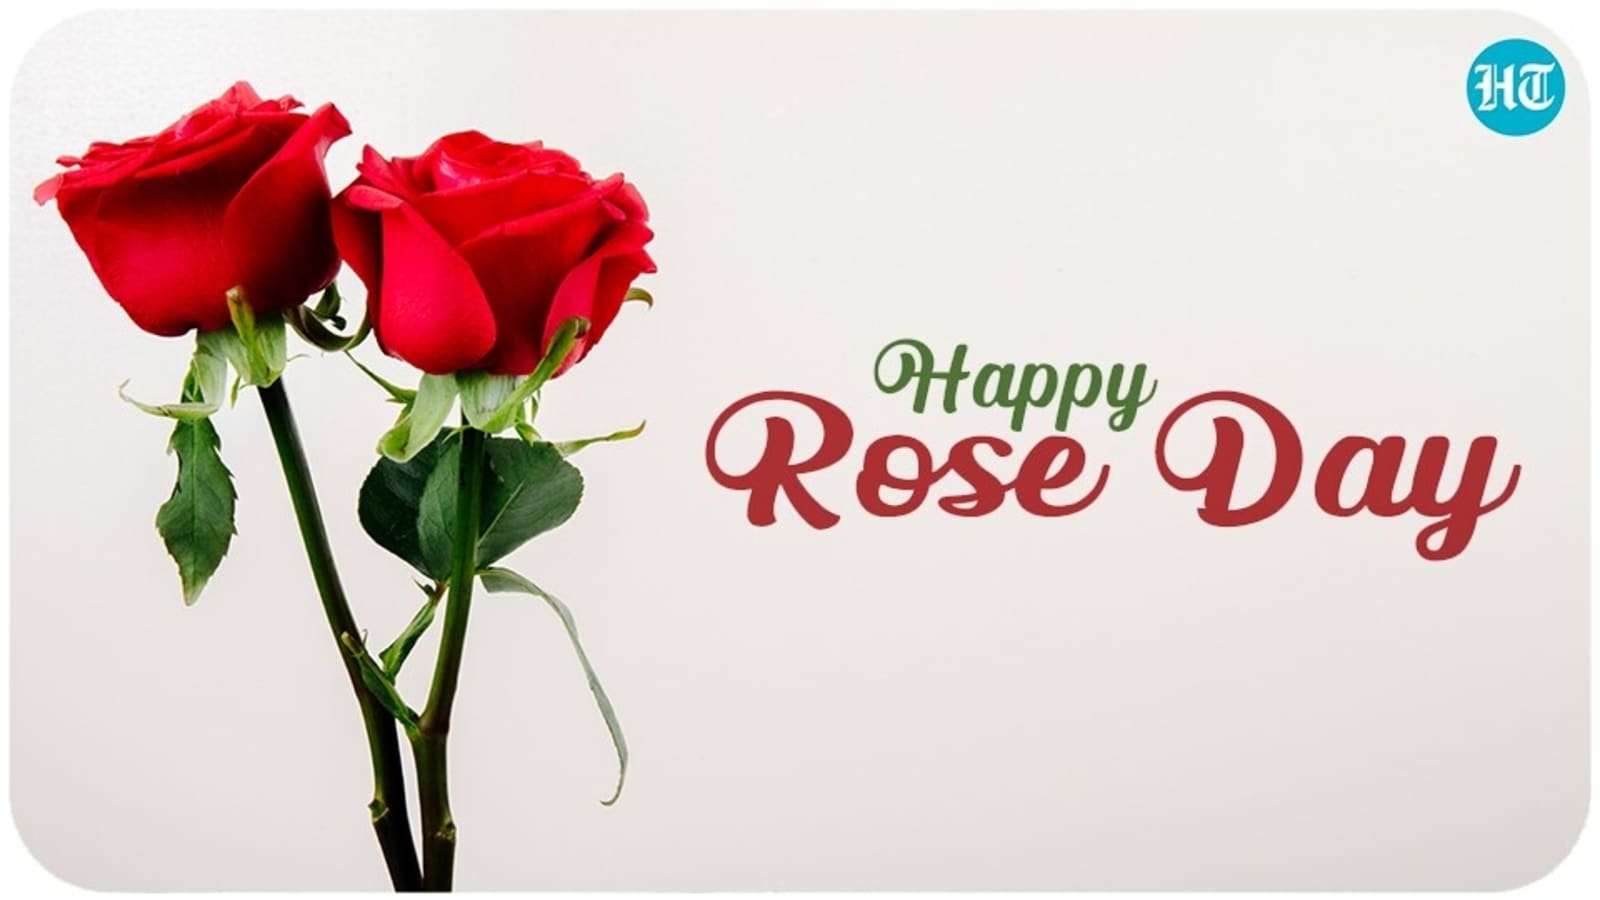 Happy Rose Day 2022: Wishes, image